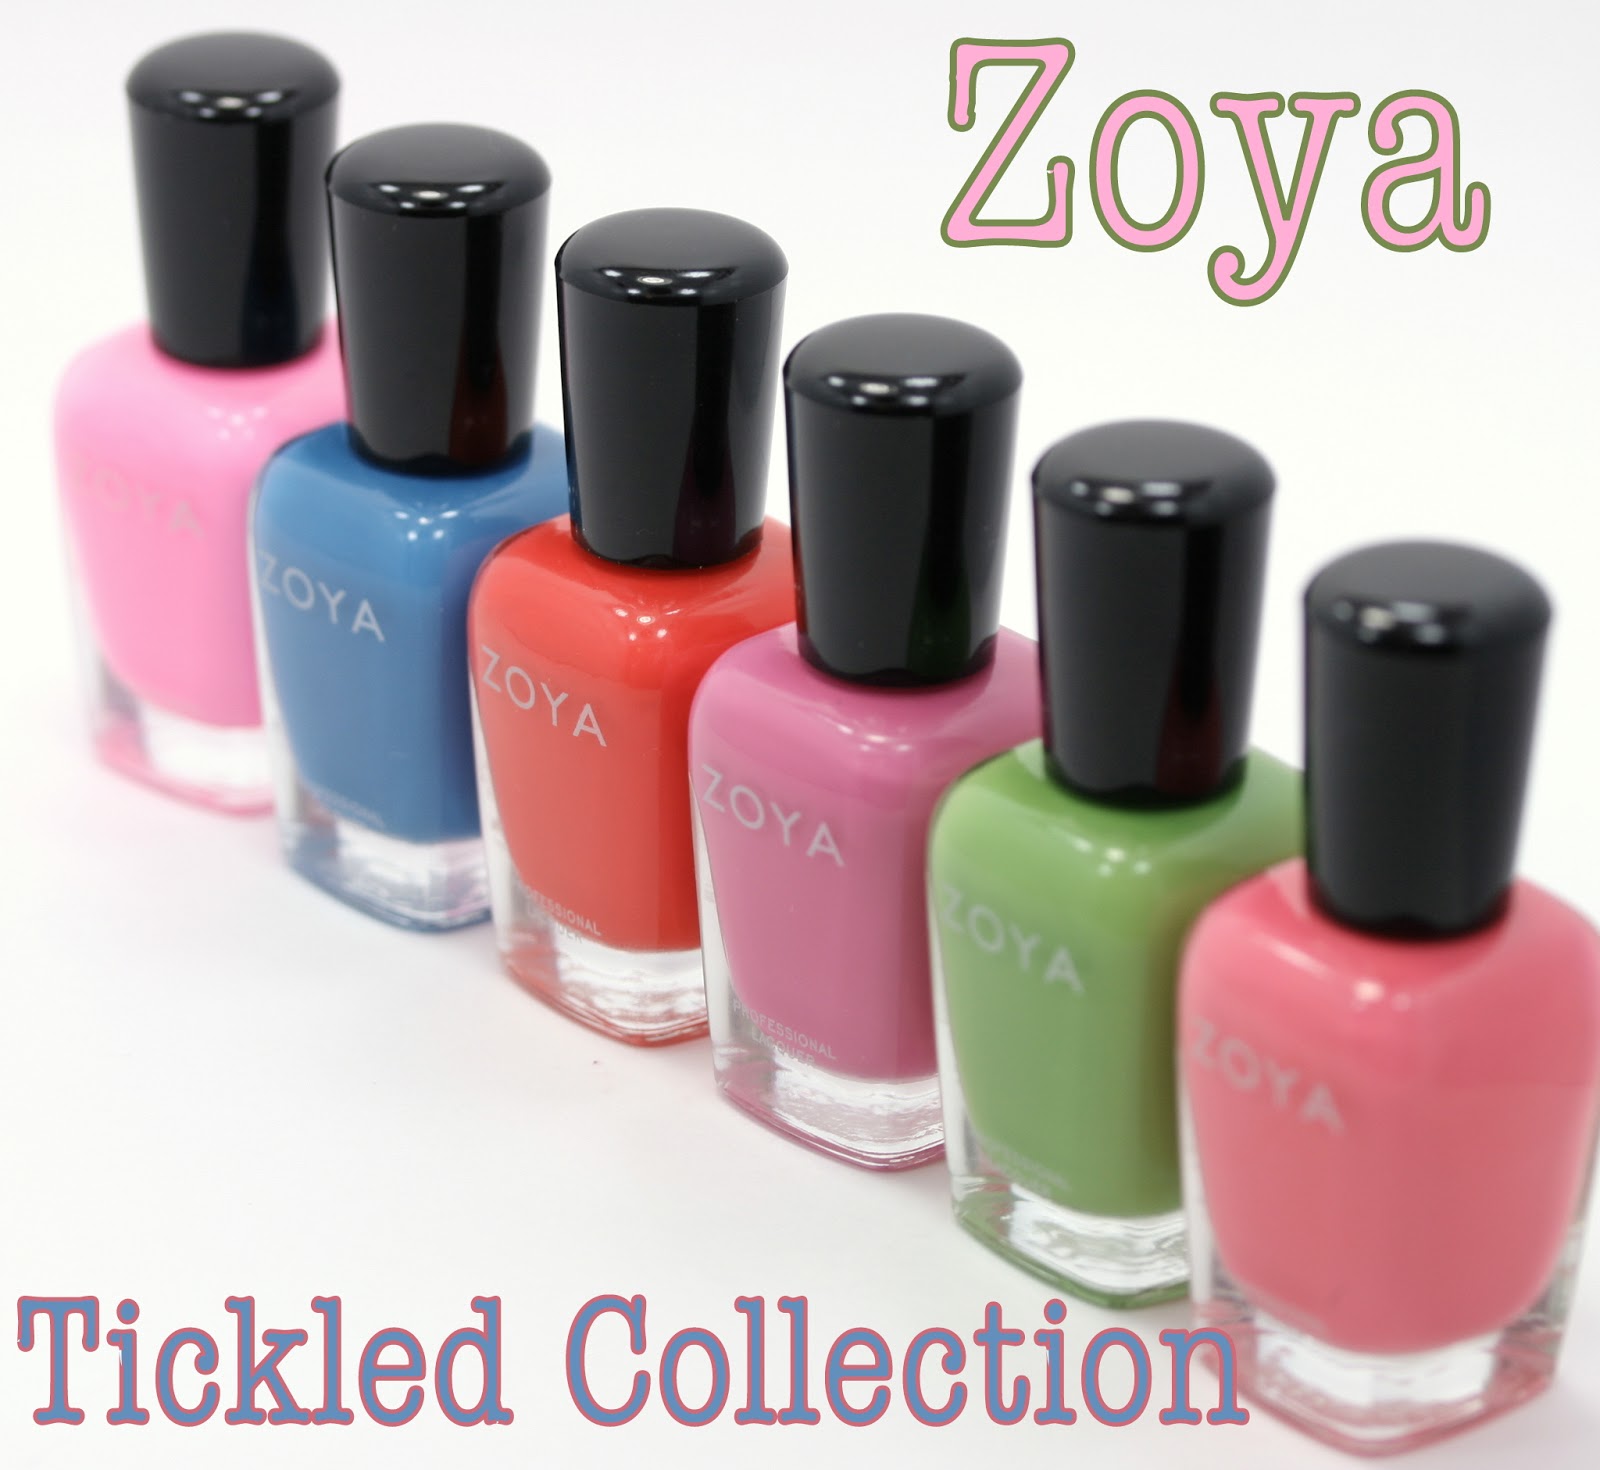 Zoya Tickled Collection